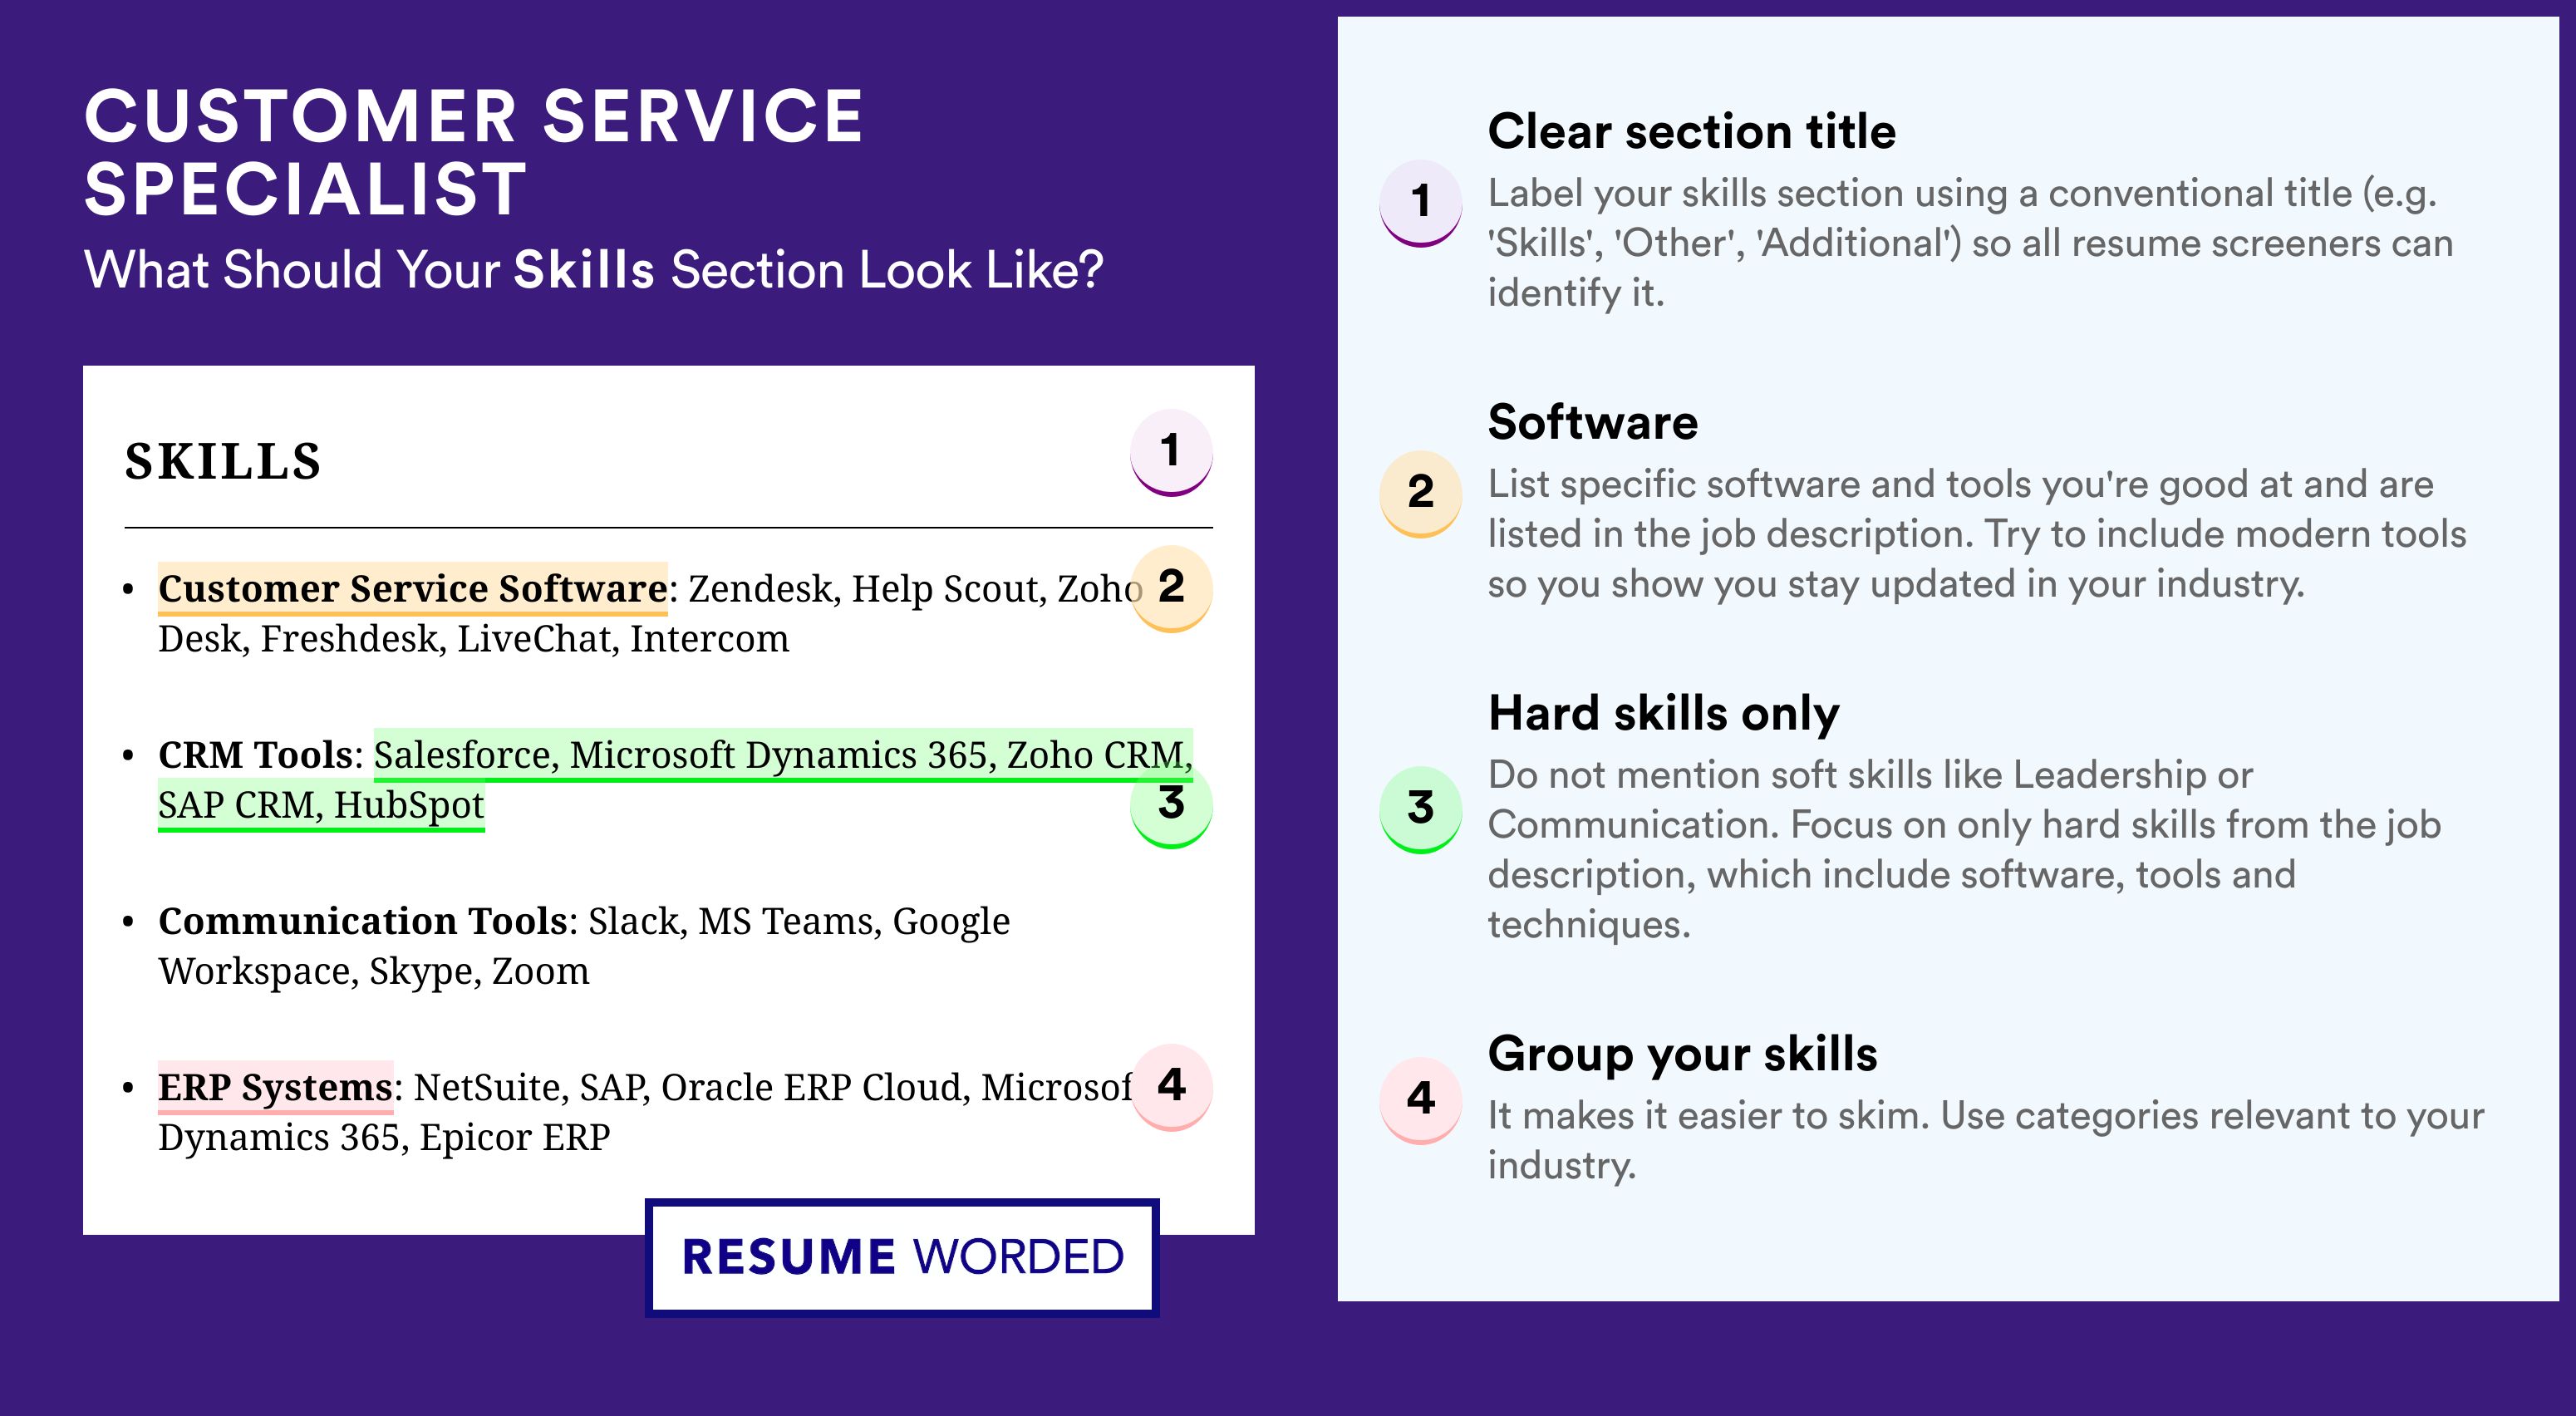 How To Write Your Skills Section - Customer Service Specialist Roles